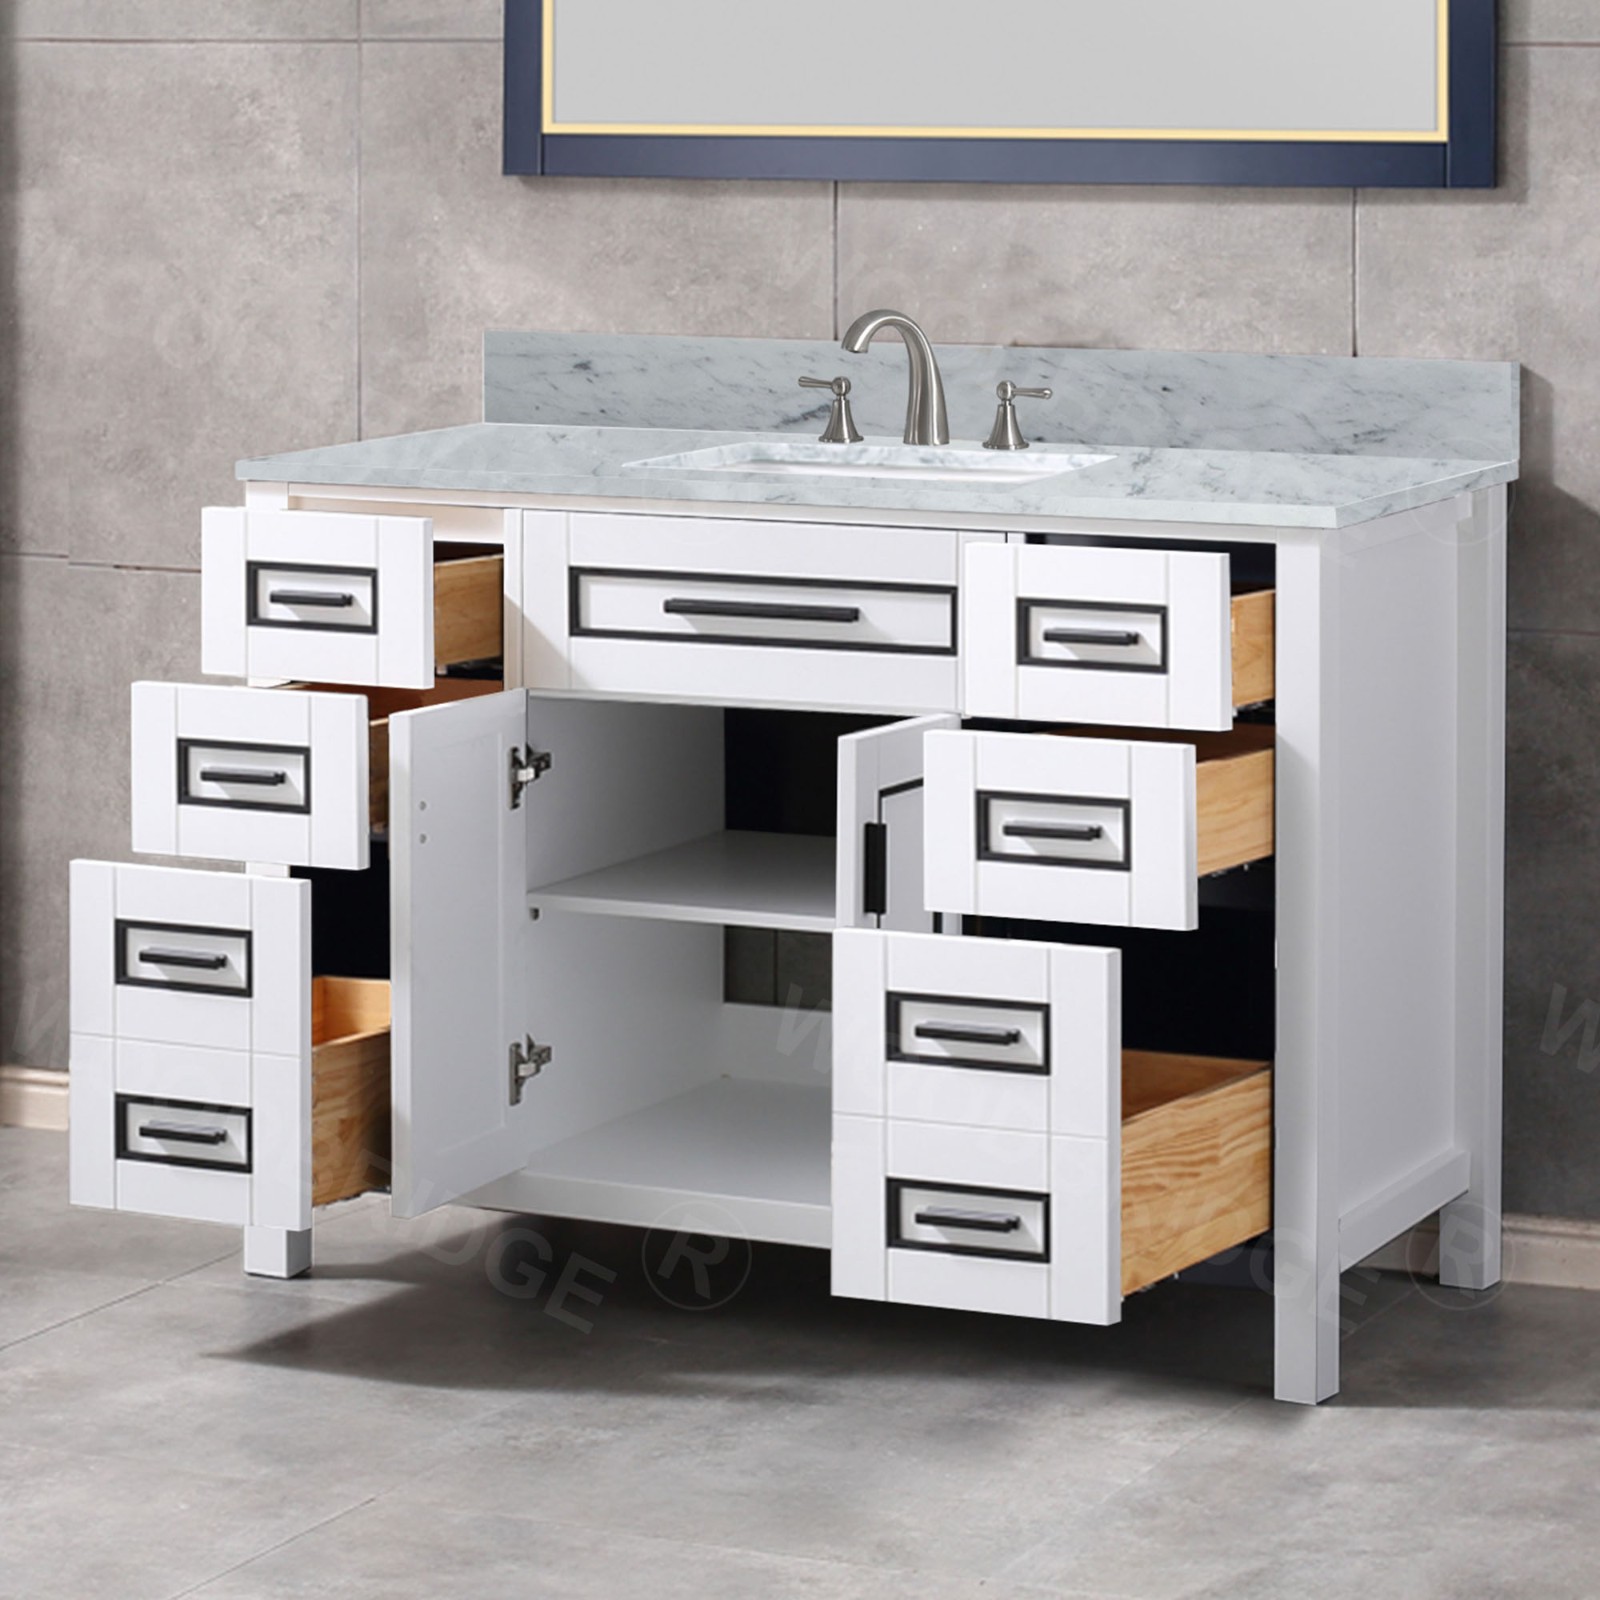  WOODBRIDGE Milan  49” Floor Mounted Single Basin Vanity Set with Solid Wood Cabinet in White, and Carrara White Marble Vanity Top with Pre-installed Undermount Rectangle Bathroom Sink in White, Pre-Drilled 3-Hole for 8-inch Widespread Faucet_4693